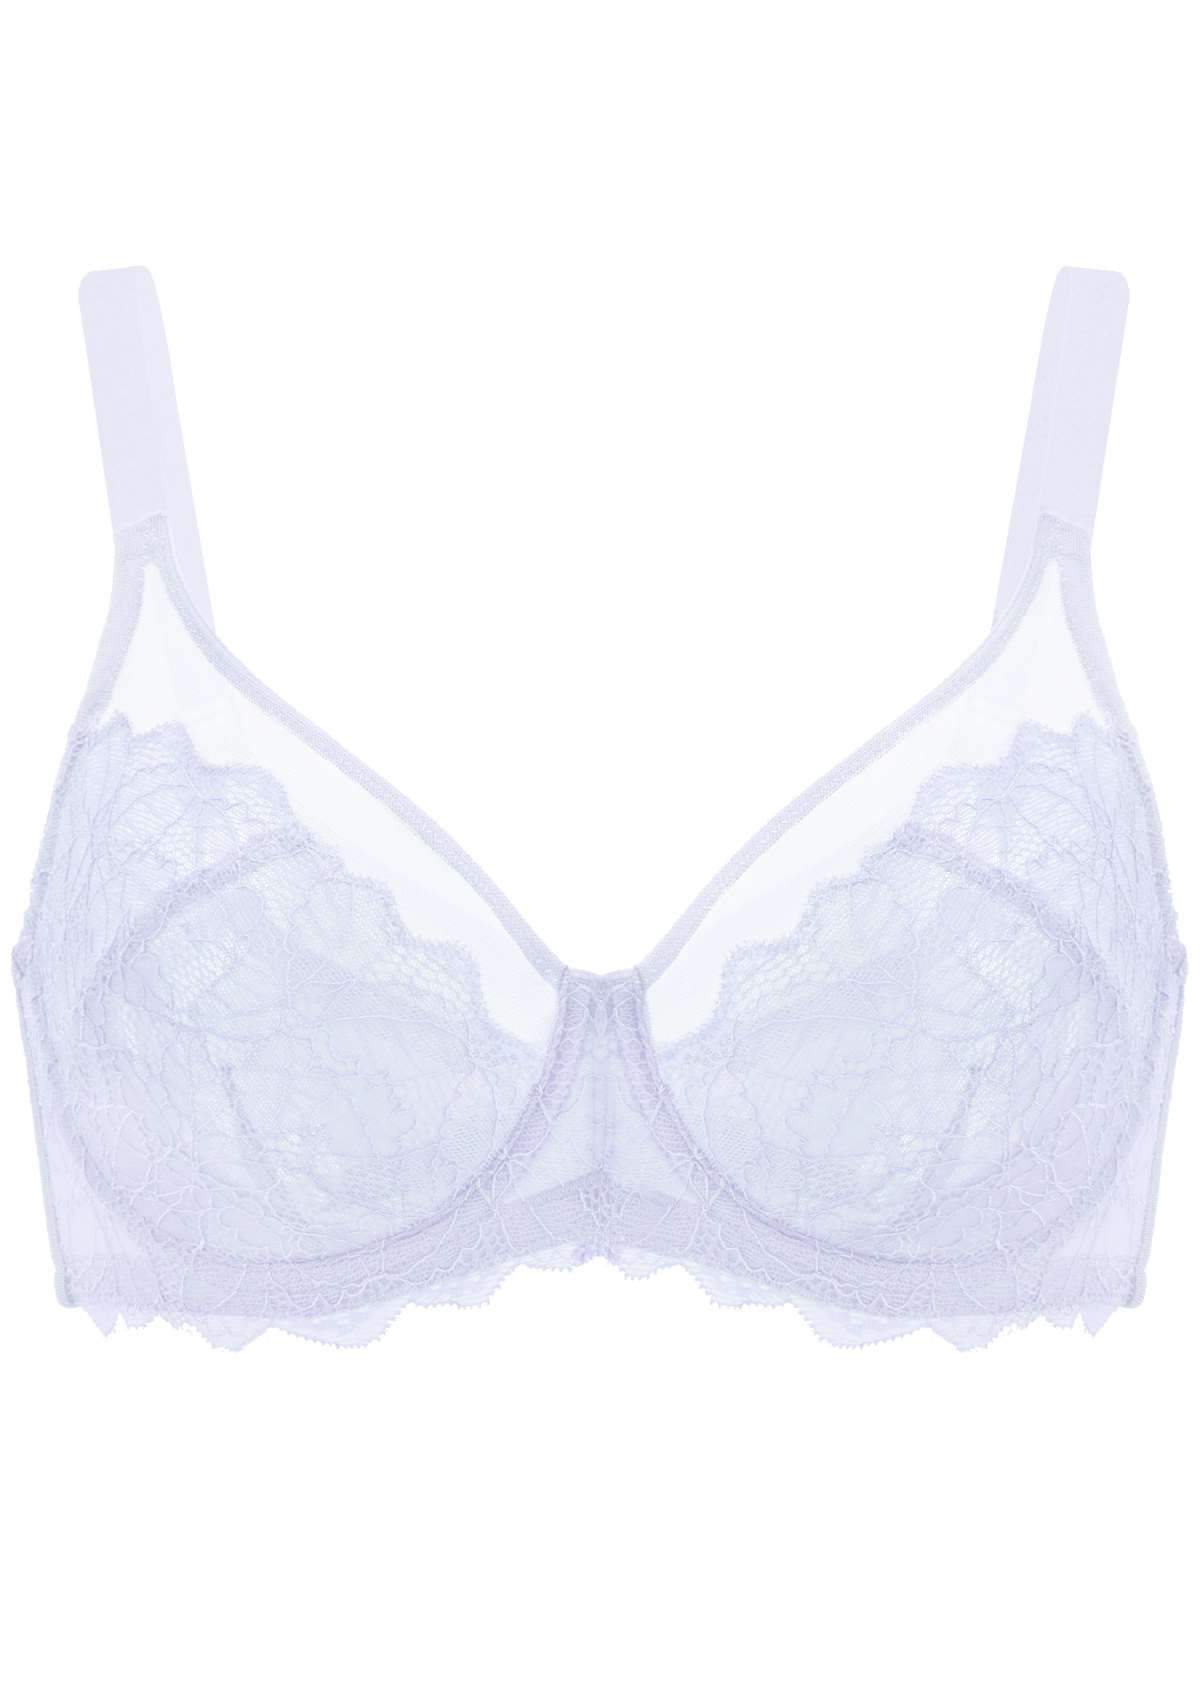 HSIA Wisteria Bra For Lift And Support - Full Coverage Minimizer Bra - Crystal Blue / 34 / C